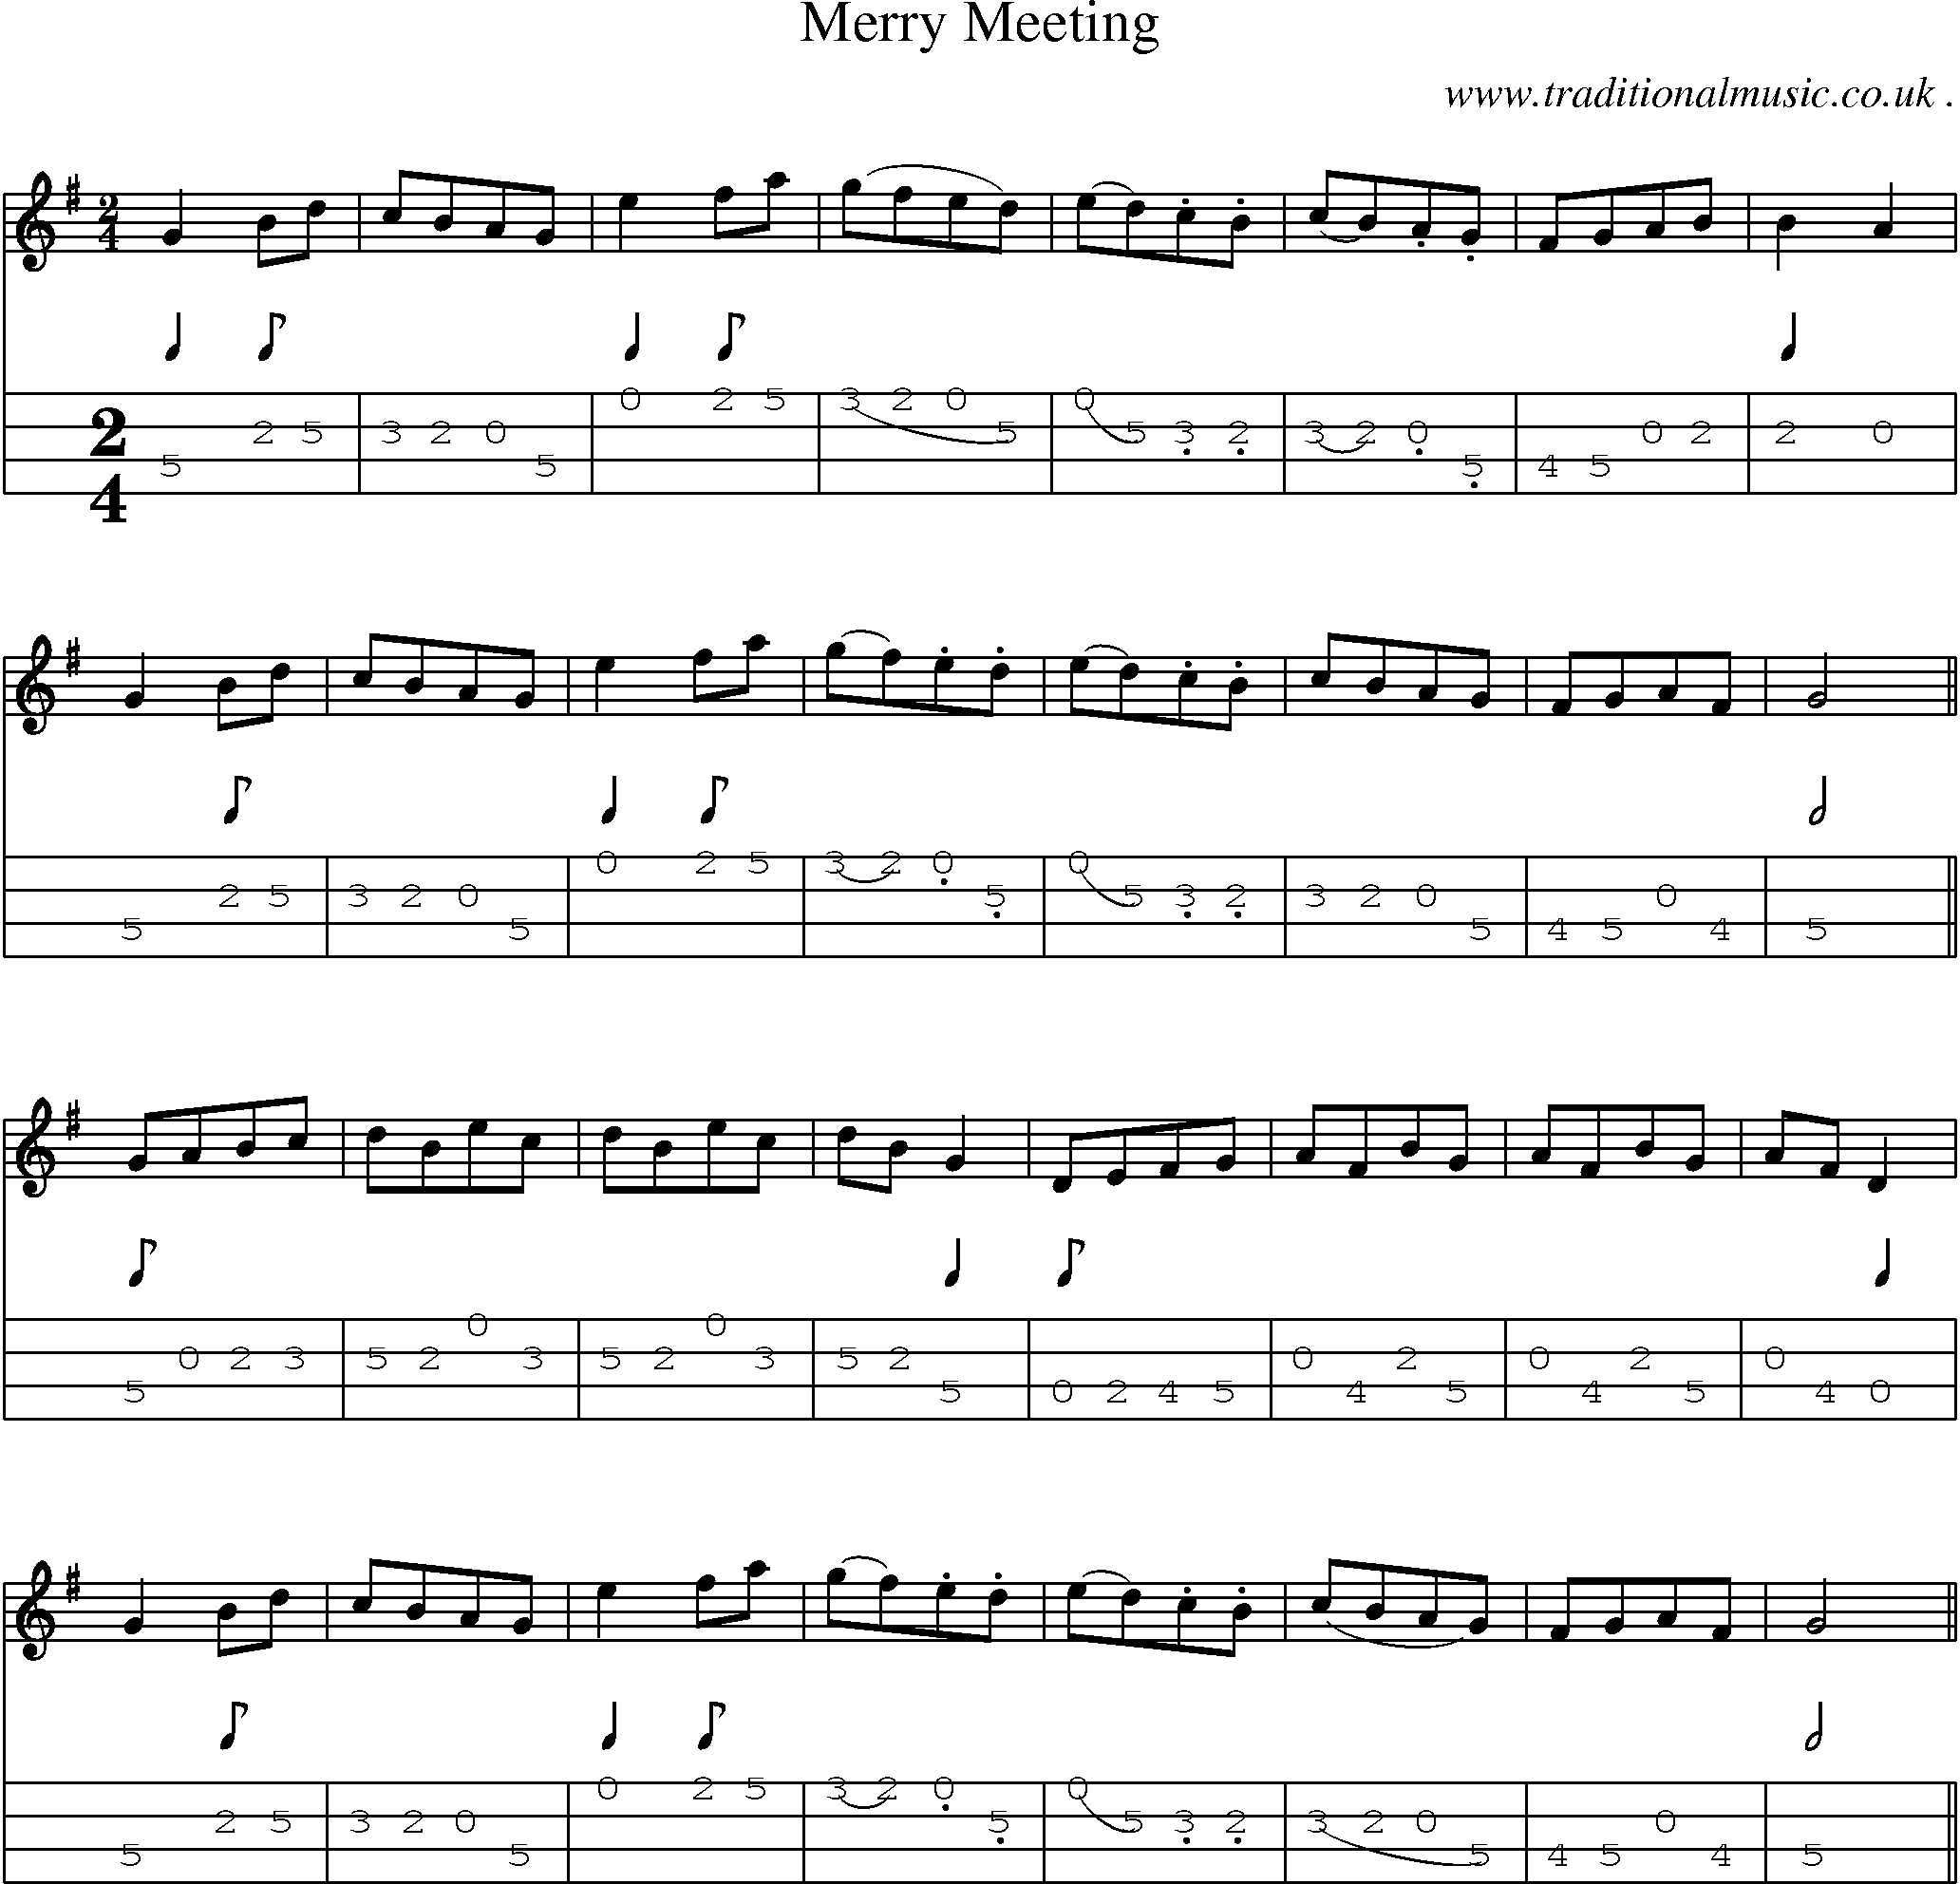 Sheet-Music and Mandolin Tabs for Merry Meeting